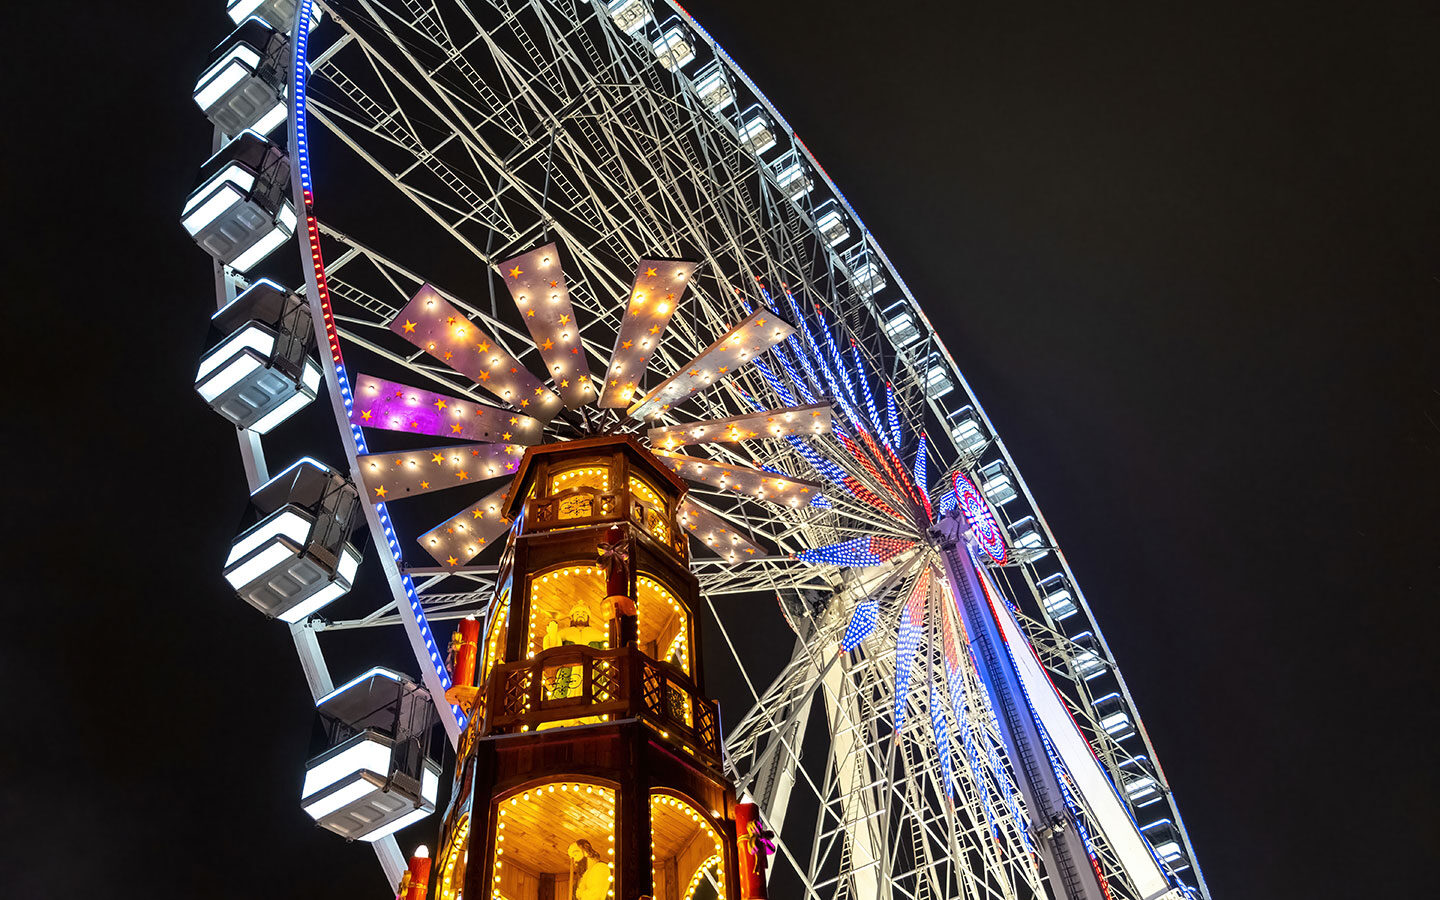 The ferris wheel at the Tuileries Christmas market